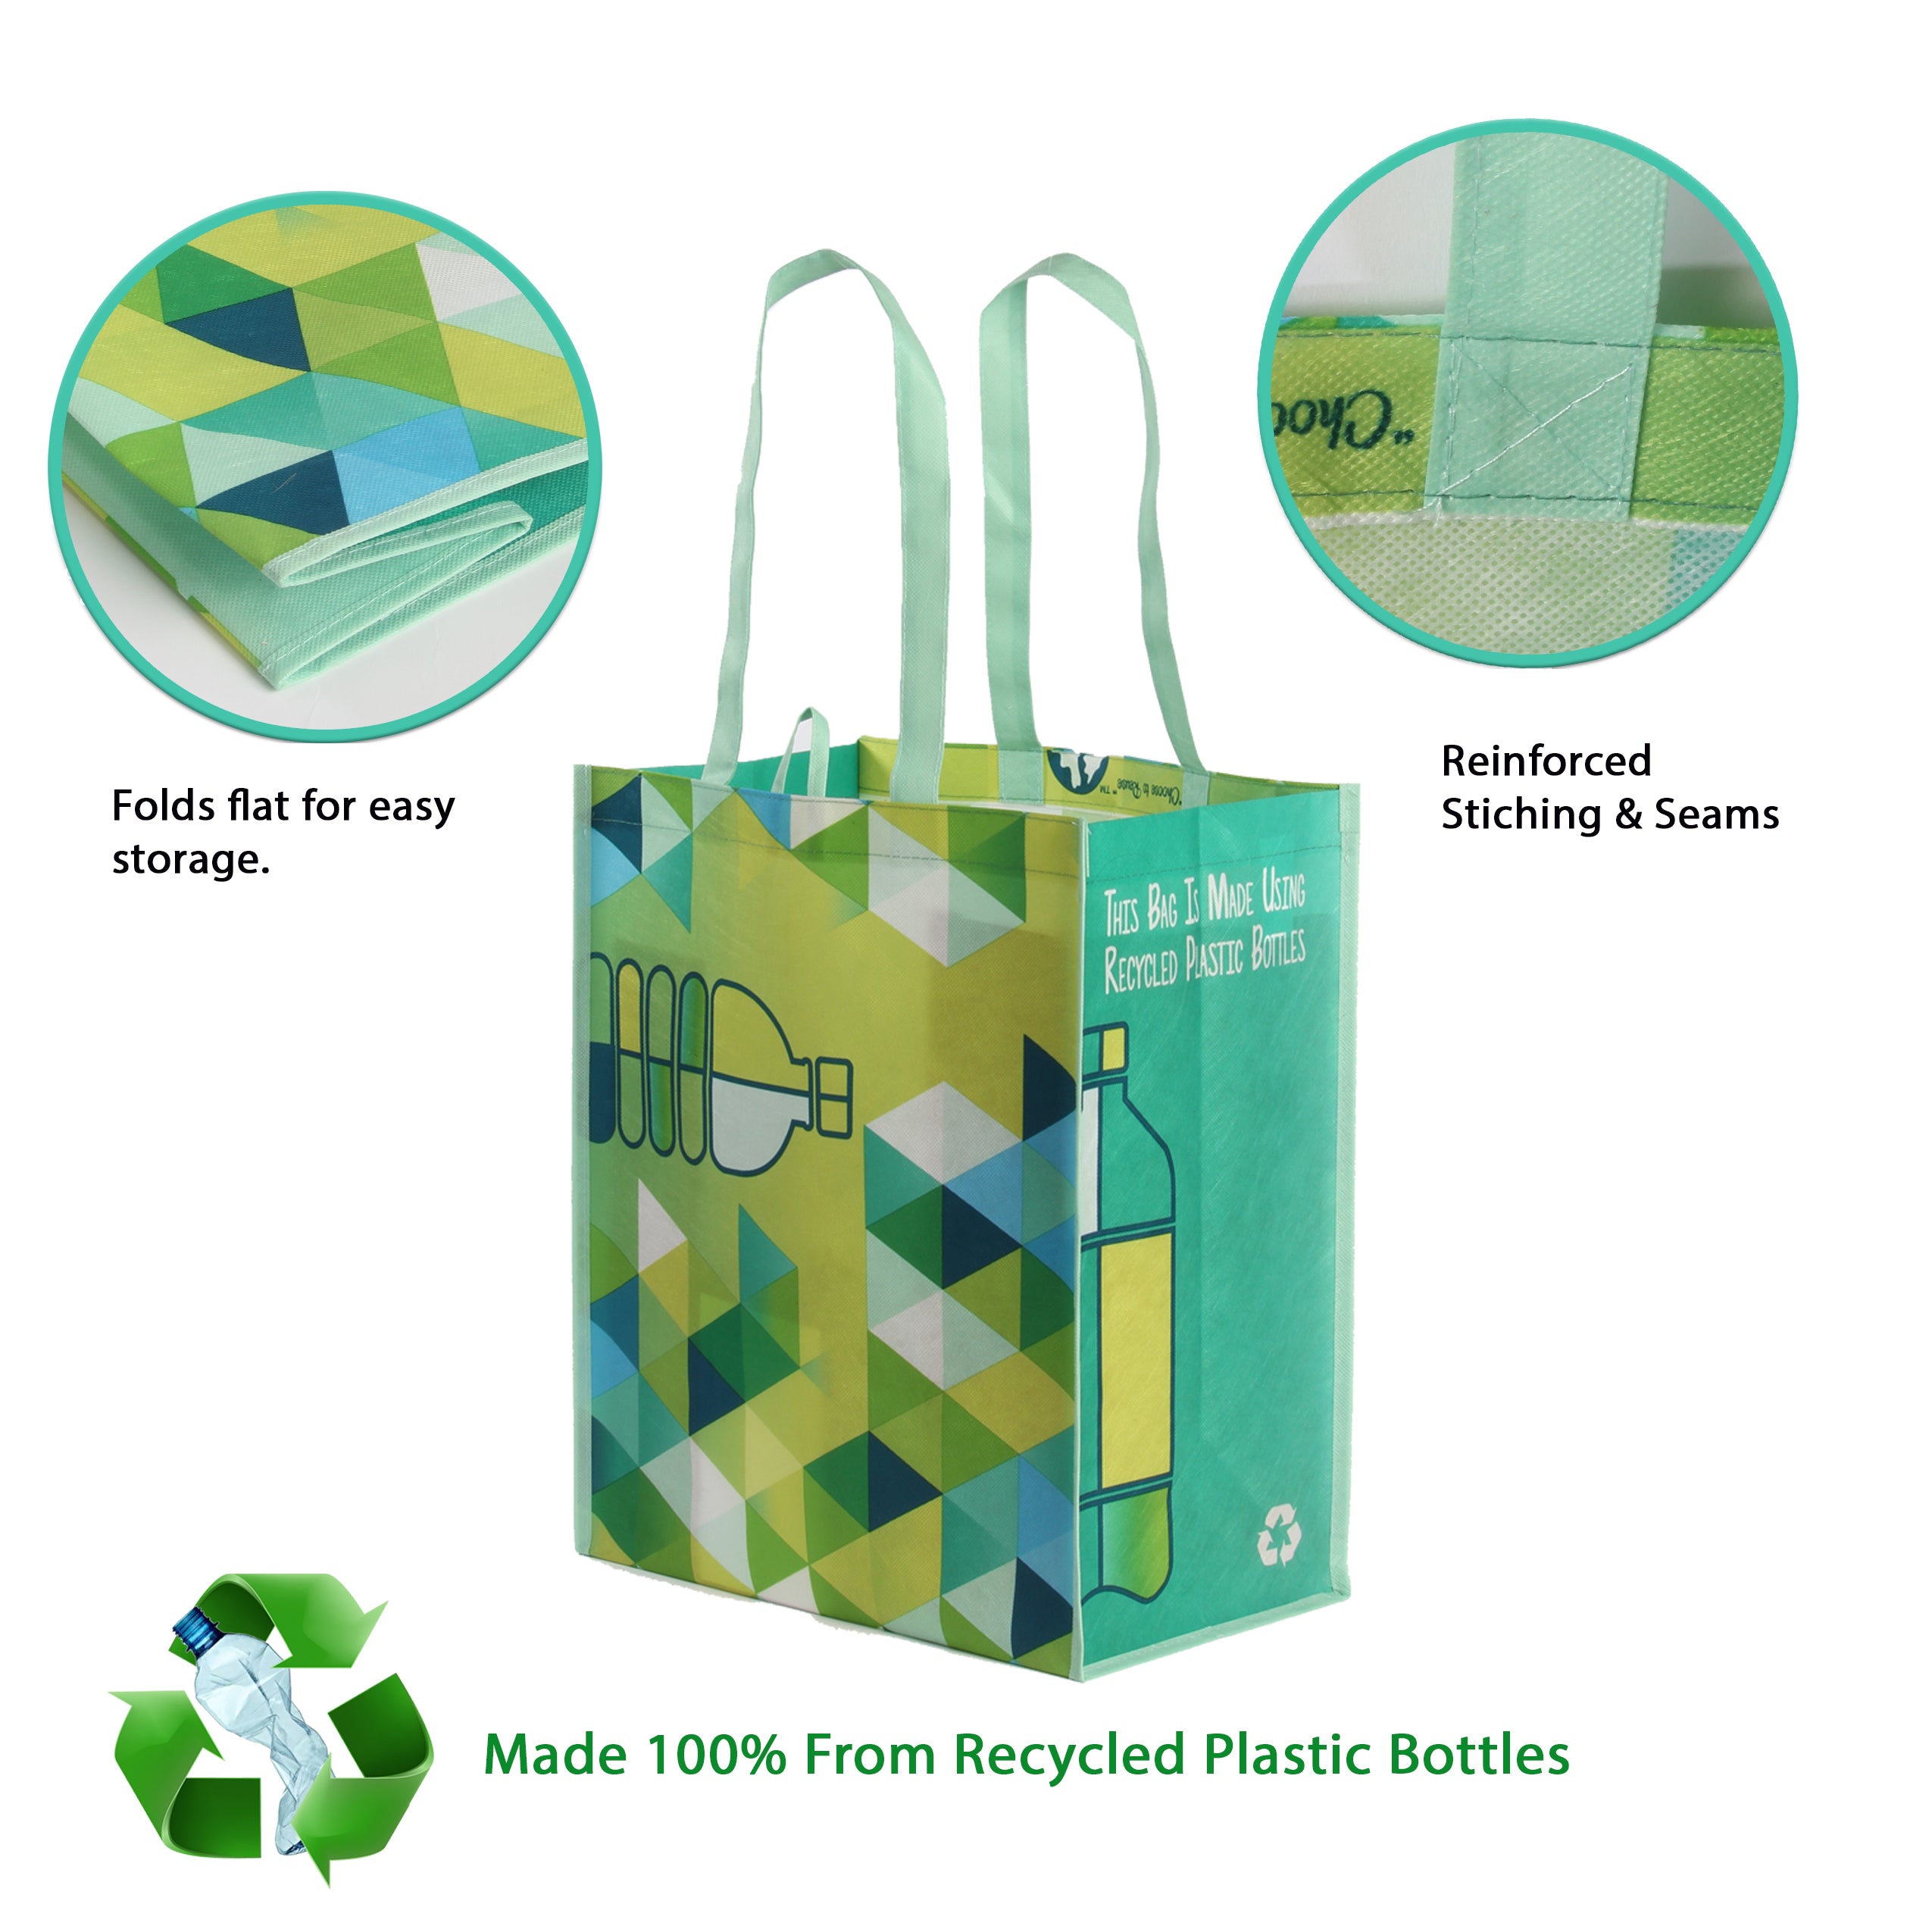 Recycle Bags - Foldable bags made from 100% rPET